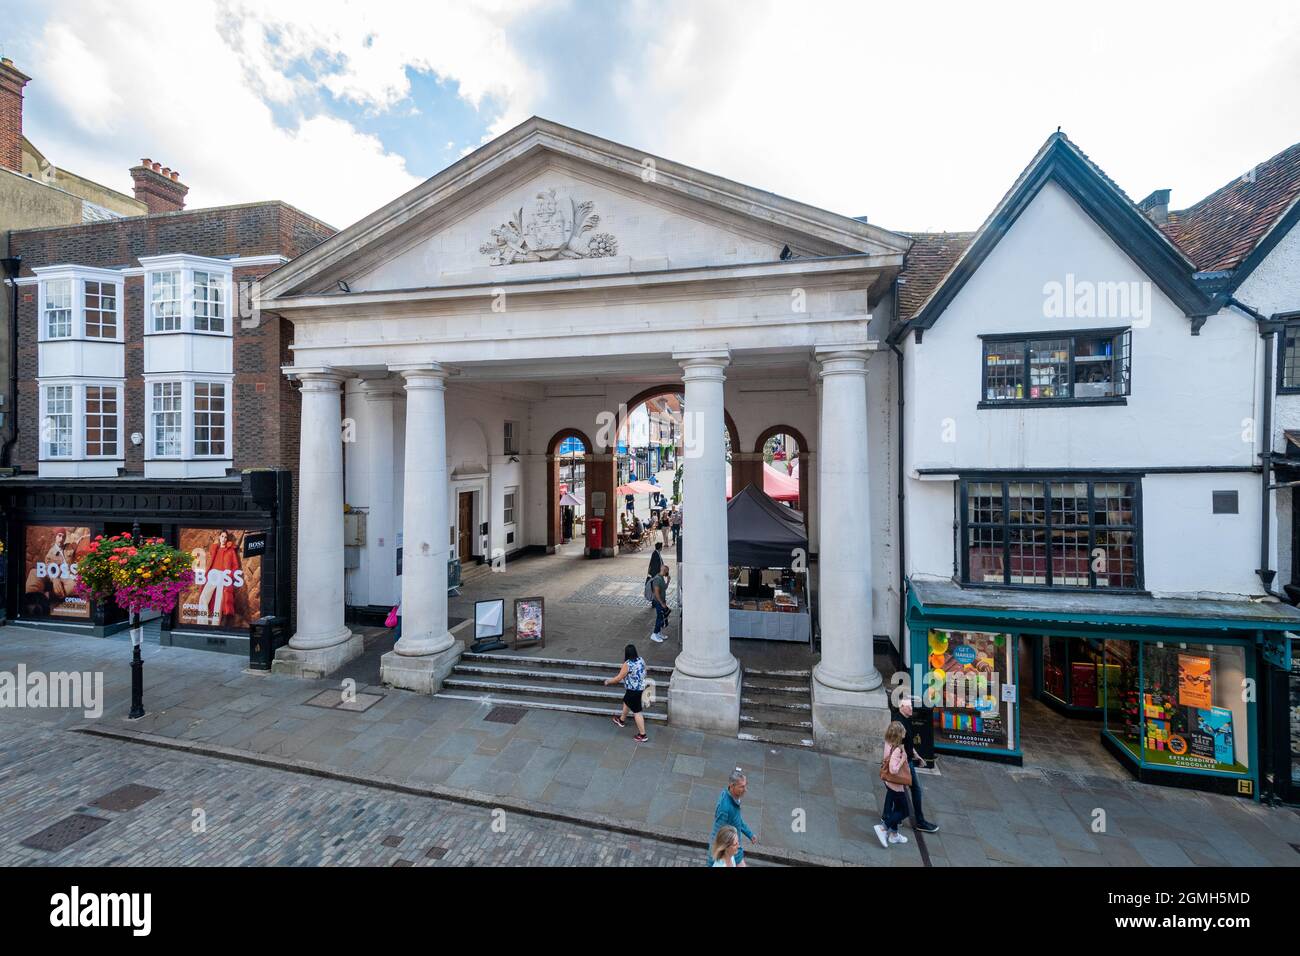 View of Tunsgate Arch and shops on Guildford High Street. Guildford town centre, Surrey, England, UK Stock Photo